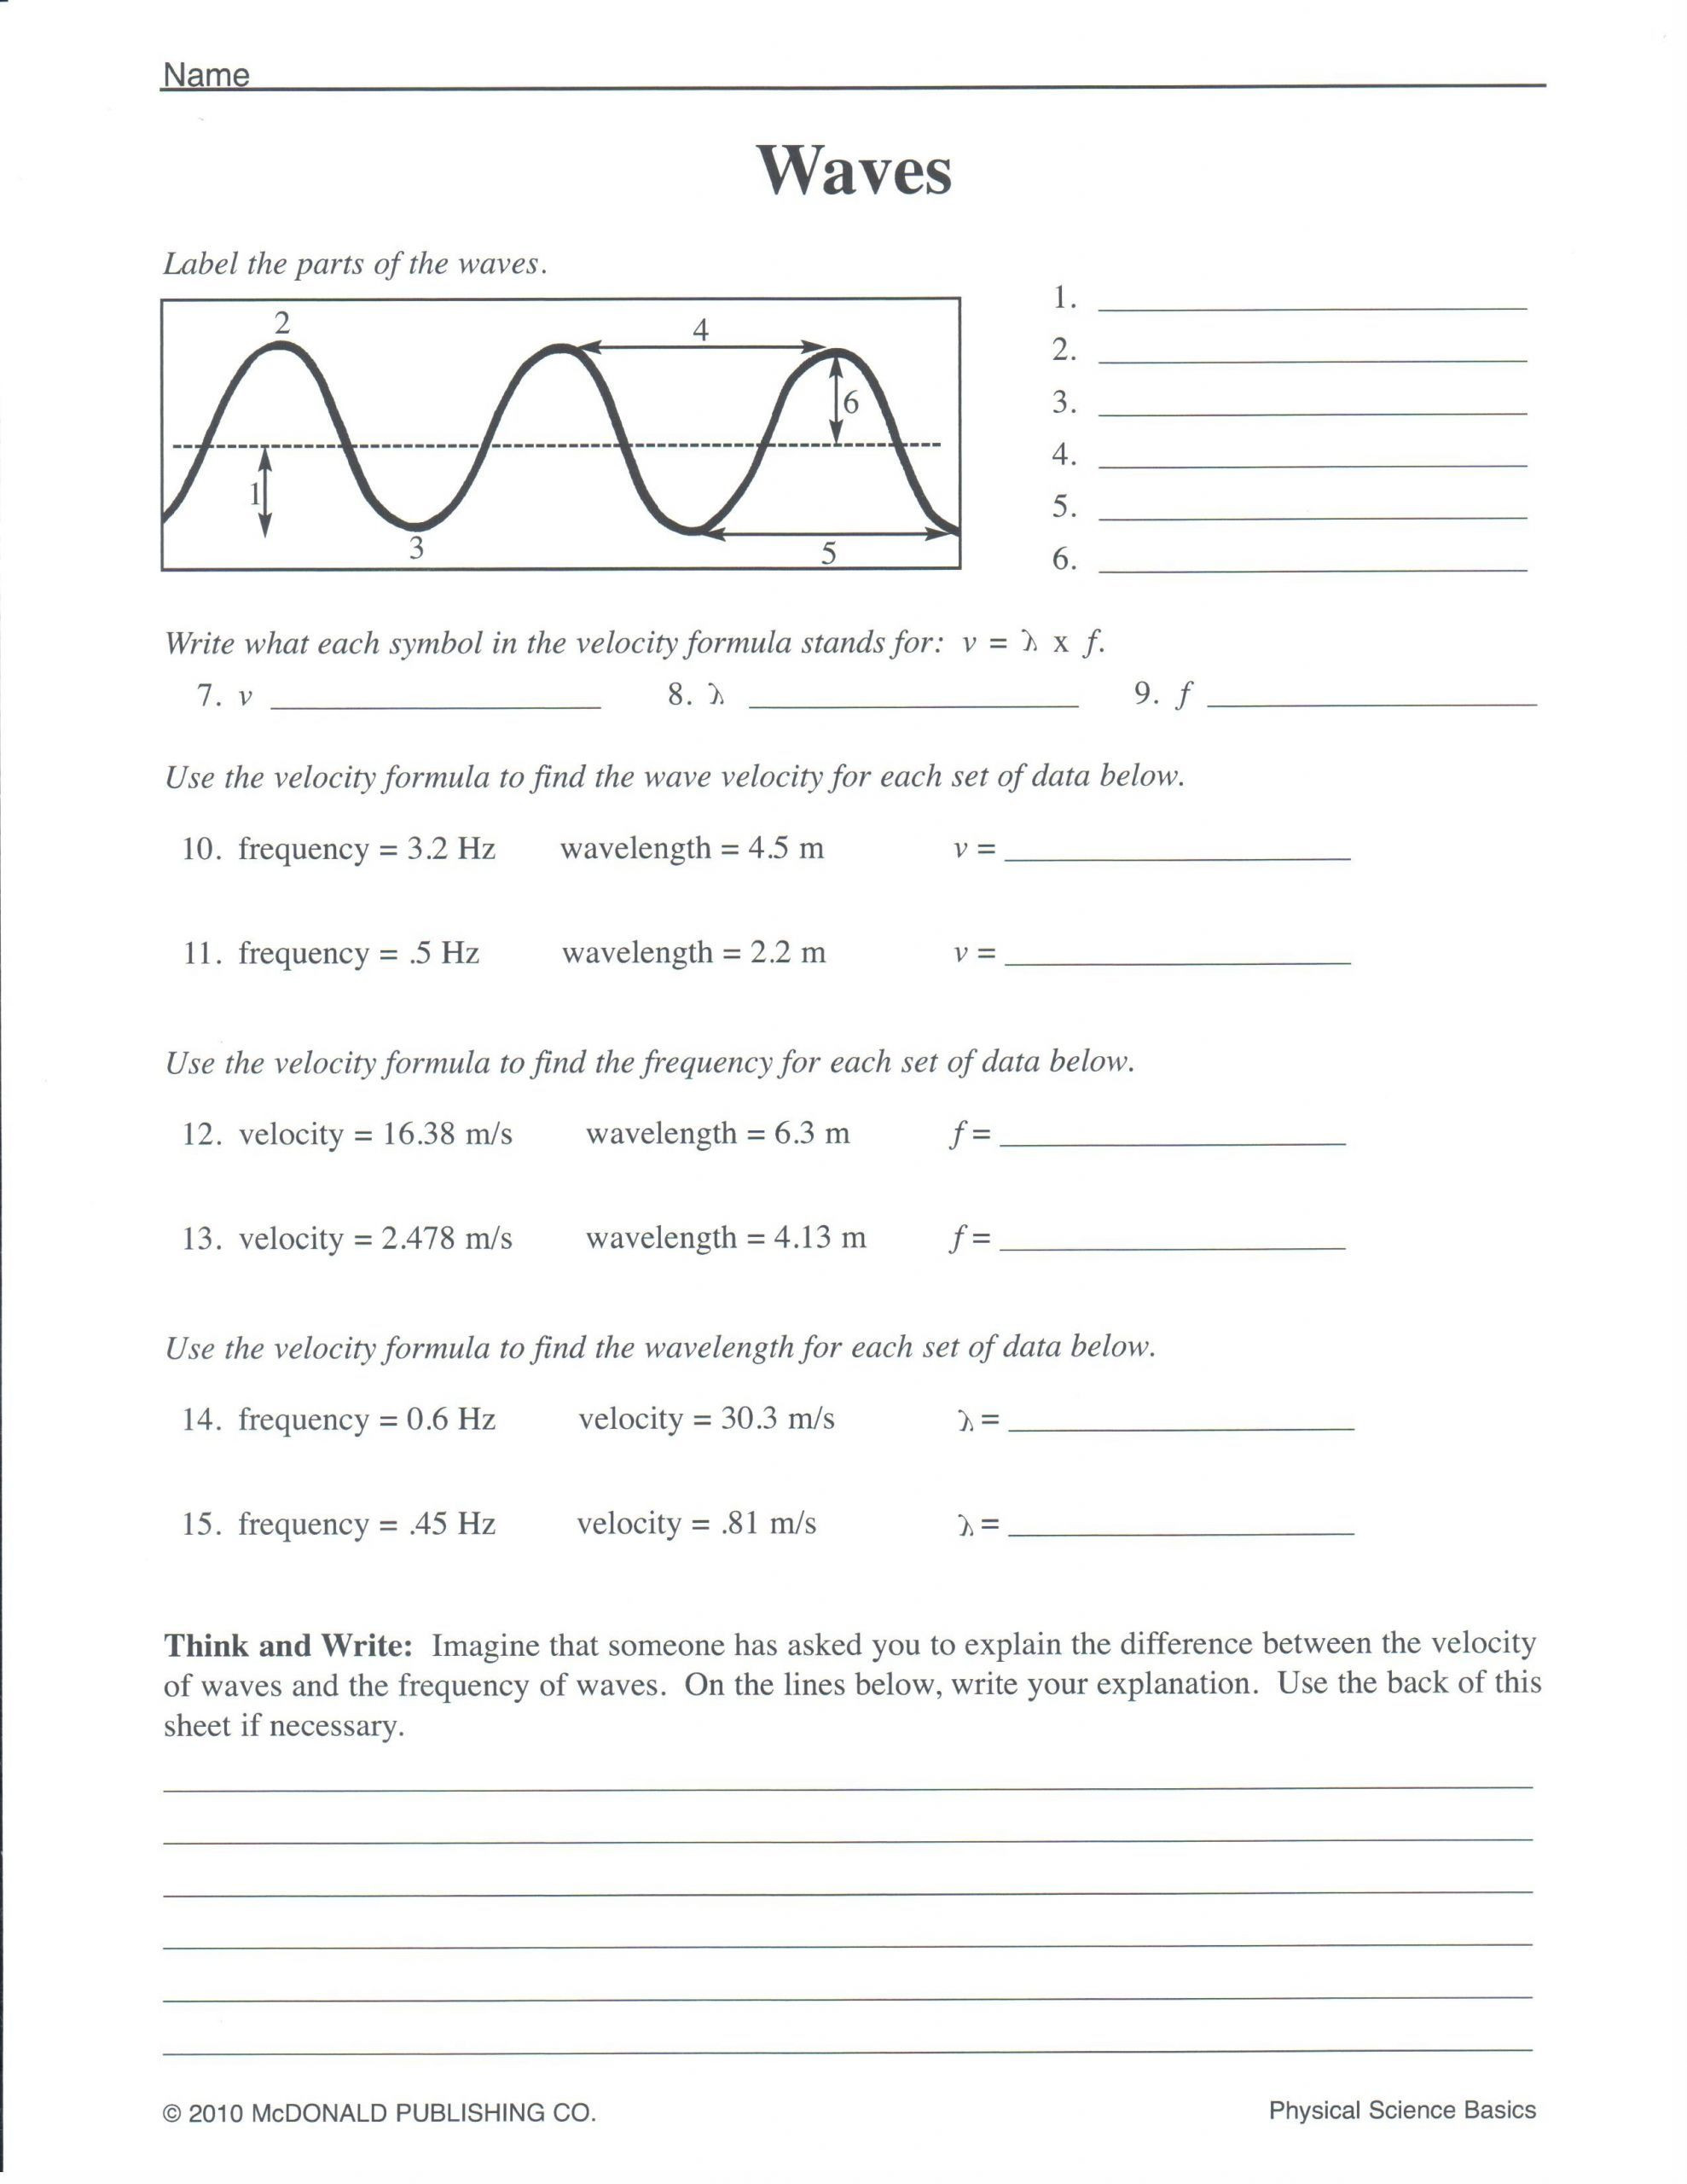 Wave Review Worksheet Answer Key 8 Recent Speed Velocity and Acceleration Di 2020